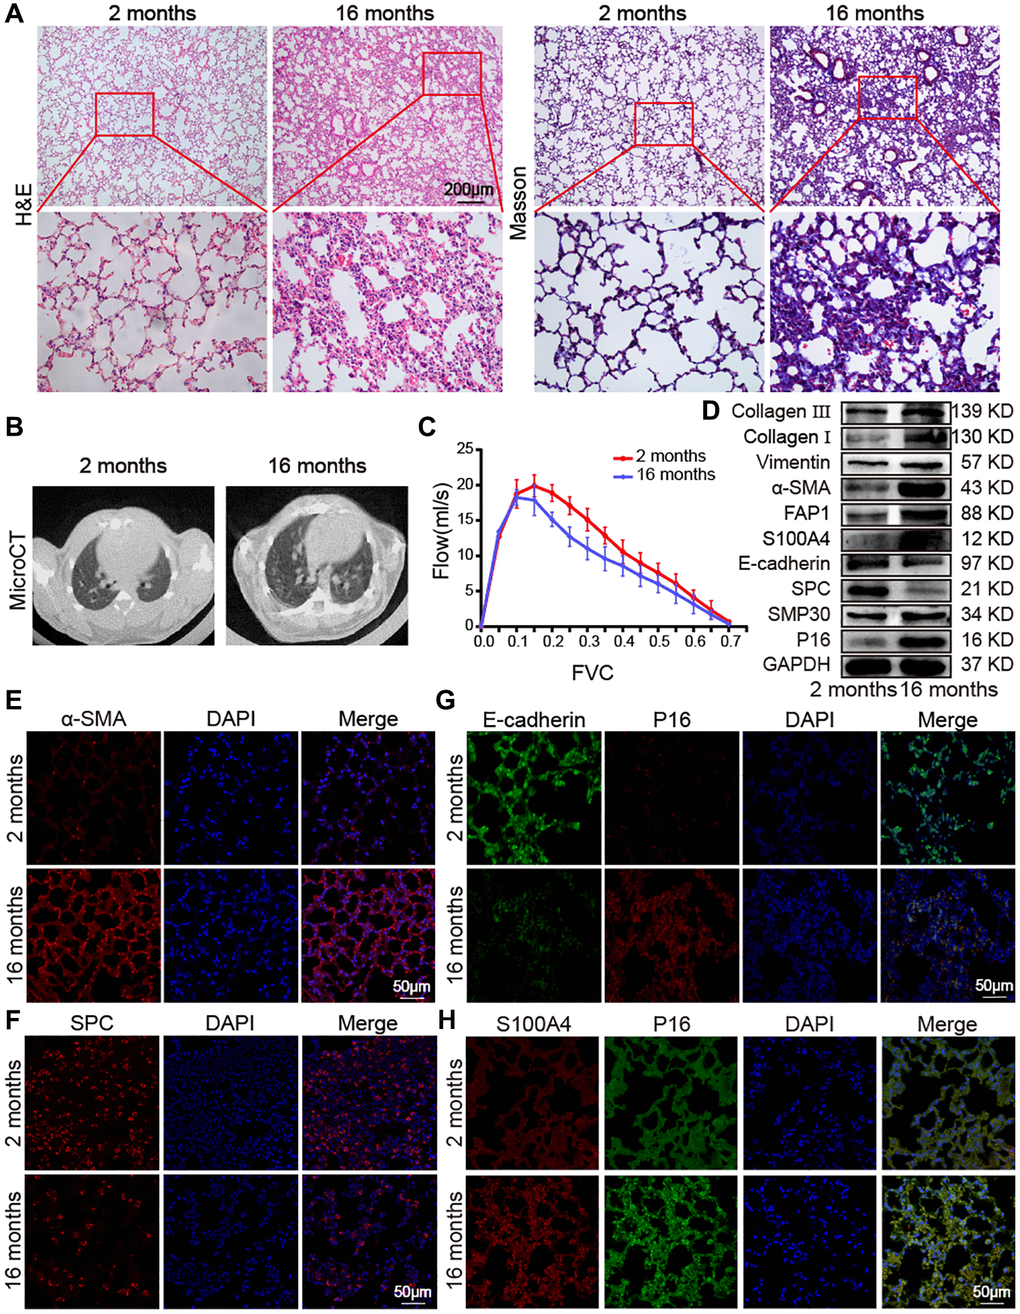 Impact of aging on mouse lung. (A) H&E and Masson staining showed that the alveolar structure of the lung tissue of 2-month-old mice was clear and intact, whereas the lung tissue of 16-month-old mice had more collagen deposition, damaged alveolar structure, and thickened alveolar walls. (B) MicroCT imaging for small animal demonstrated that some old mice had fibrous strip shadows and thickened interlobular septa compared with young mice. (C) FVC results showed that pulmonary function decreased in aging mice. (D) Western blot showed that collagen III, collagen I, vimentin, α-SMA, FAP1, S100A4, SMP30, and P16 increased significantly in aging mice, but E-cadherin and SPC decreased. (E) Immunofluorescence staining showed that α-SMA expression in lung tissues of aging mice was higher than in those of young mice. (F) Immunofluorescence images showed that SPC expression was significantly lower in lung tissue of 16-month-old mice than in that of 2-month-old mice. (G) Double immunofluorescence staining showed that P16 increased in aging mice and decreased in young mice. E-cadherin decreased in aging mice and increased in young mice. (H) Double immunofluorescence staining showed that the expression of S100A4 and P16 in the lung tissue of aging mice were significantly higher than in that of young mice.